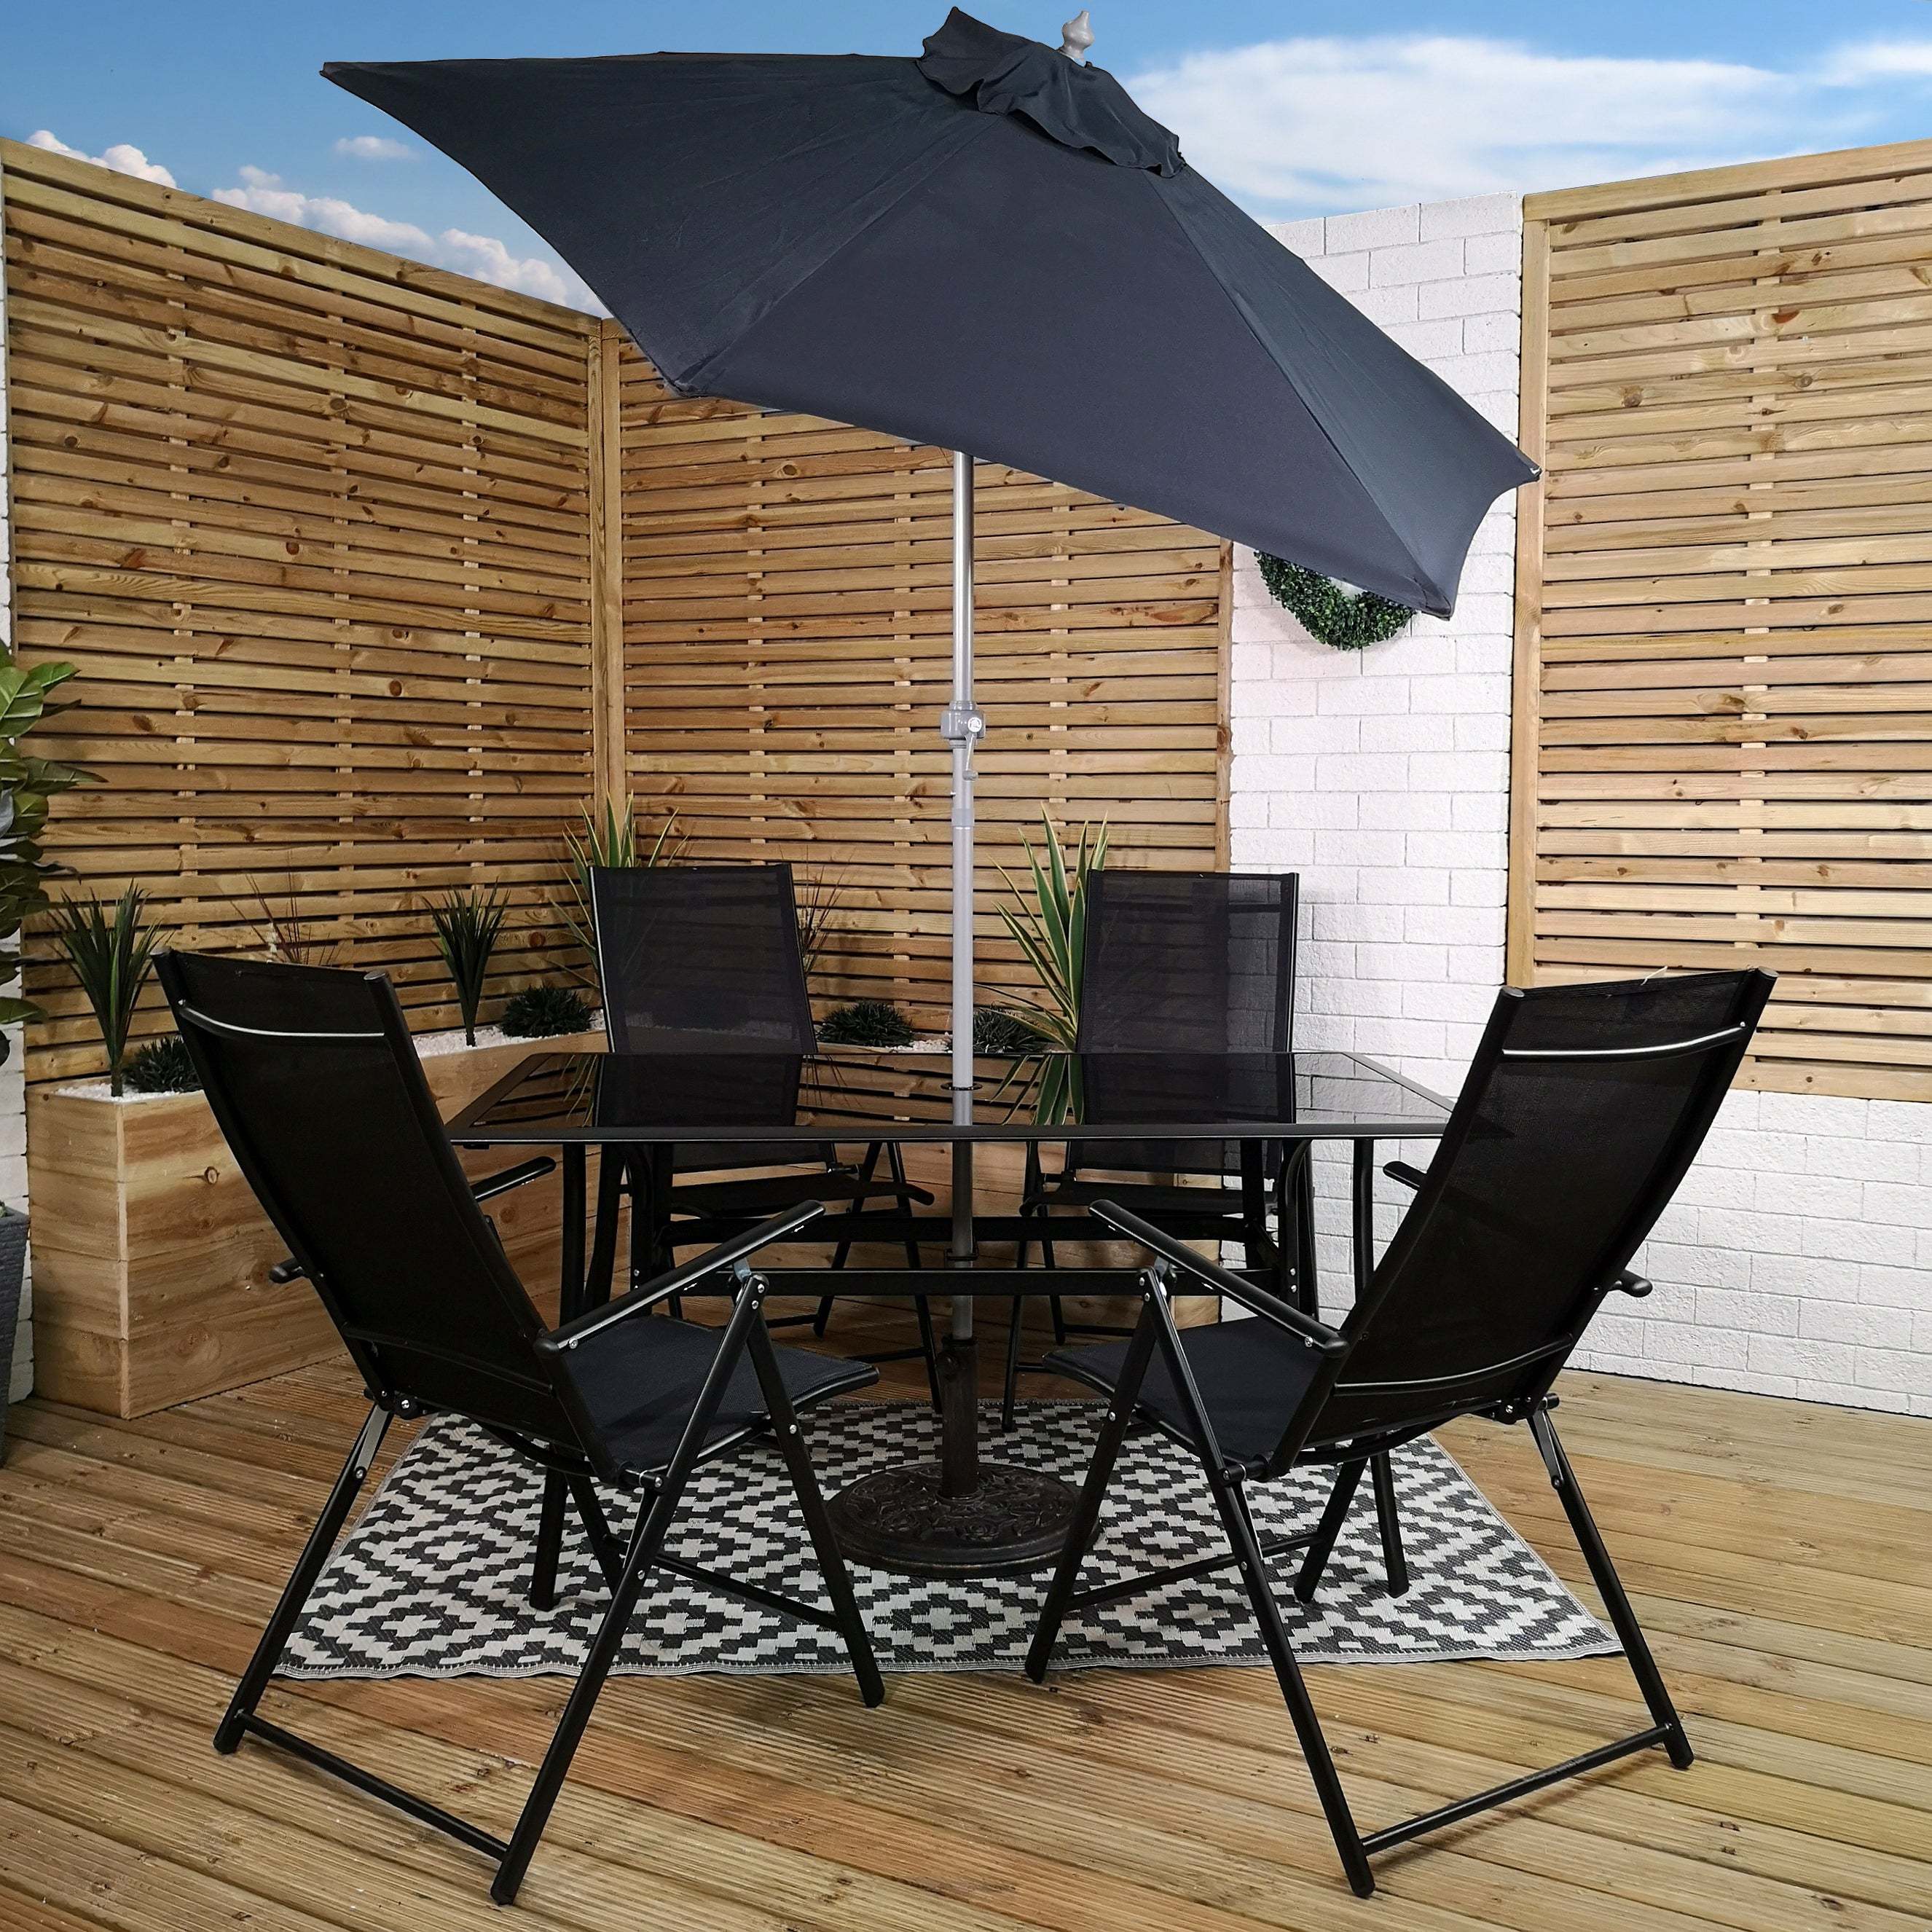 Outdoor 4 Person Rectangular Glass Top Garden Patio Dining Table Chairs With Black Parasol and Base Set